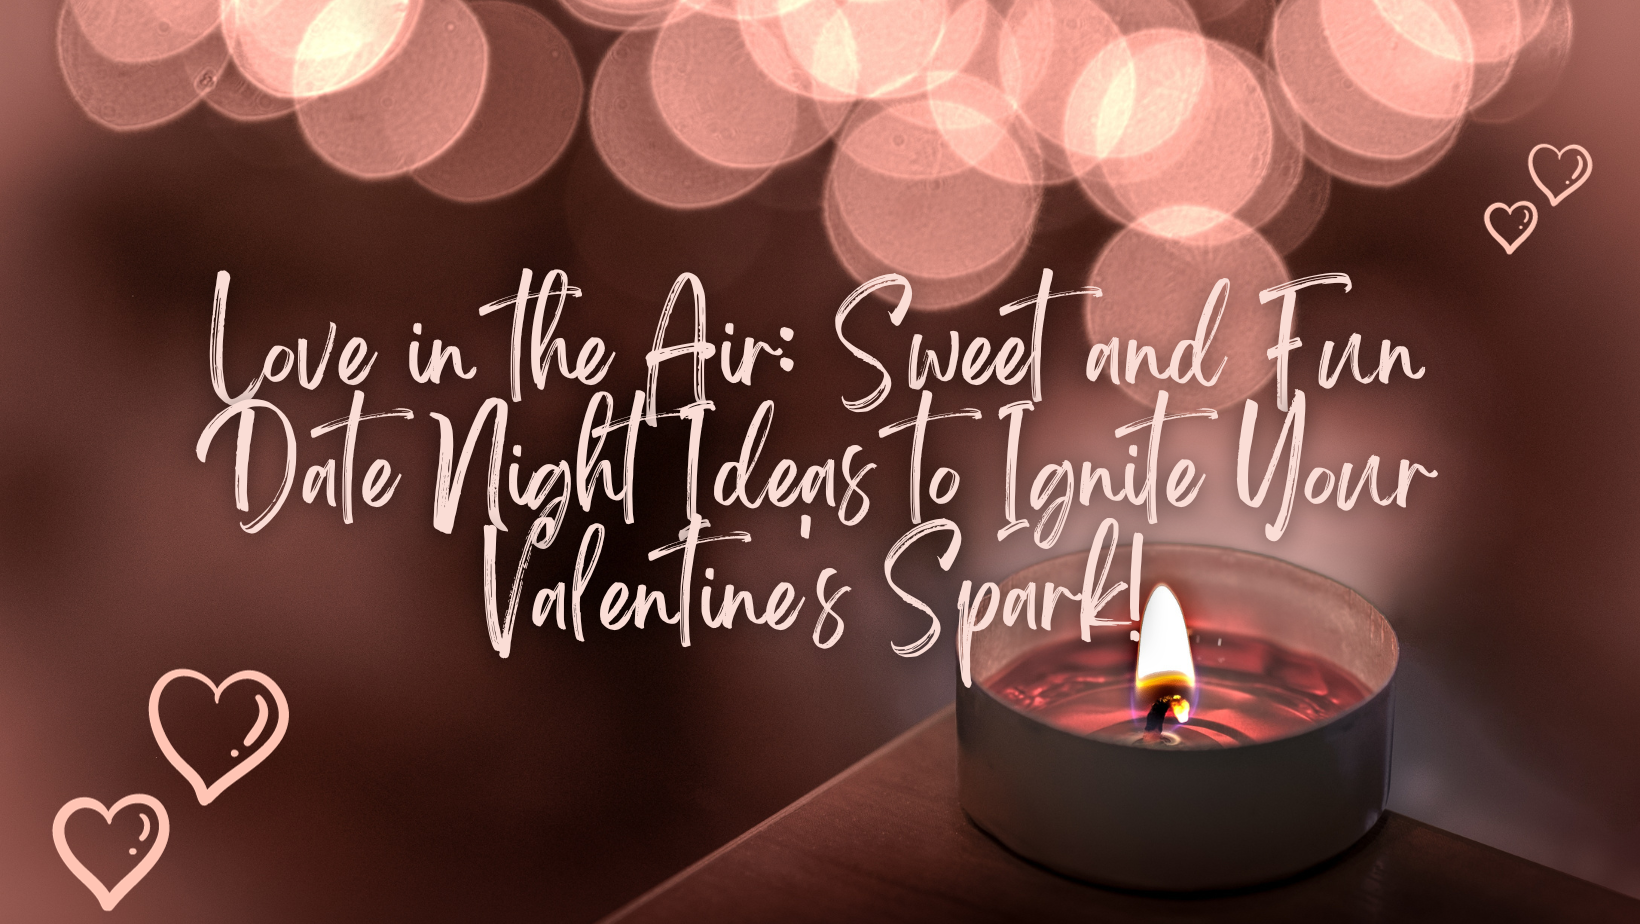 Love in the Air: Sweet and Fun Date Night Ideas to Ignite Your Valentine's Spark!